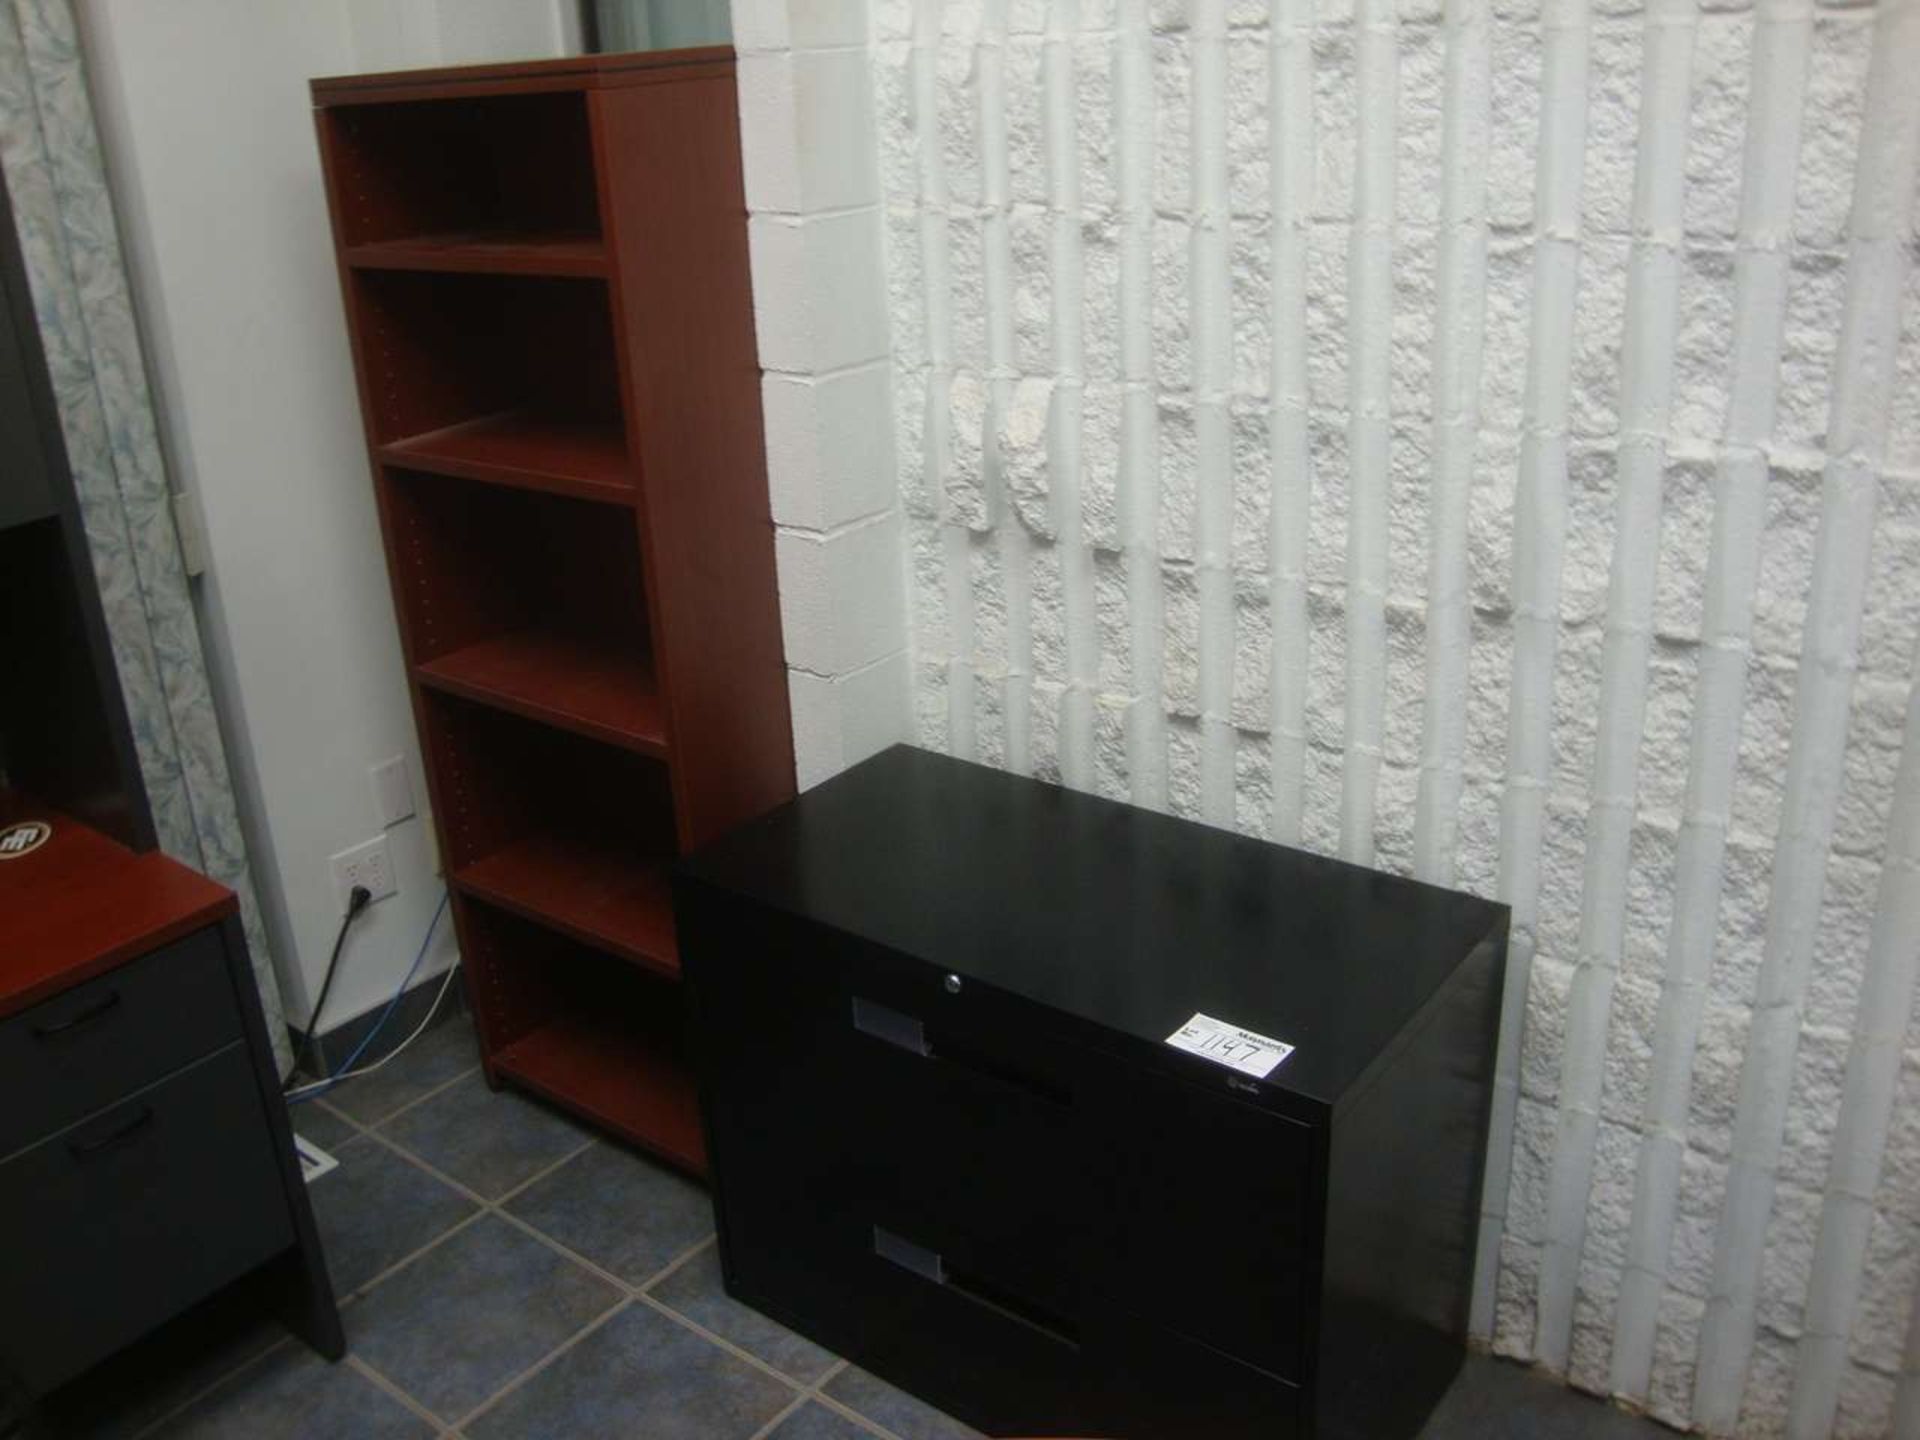 File cabinet and bookcase